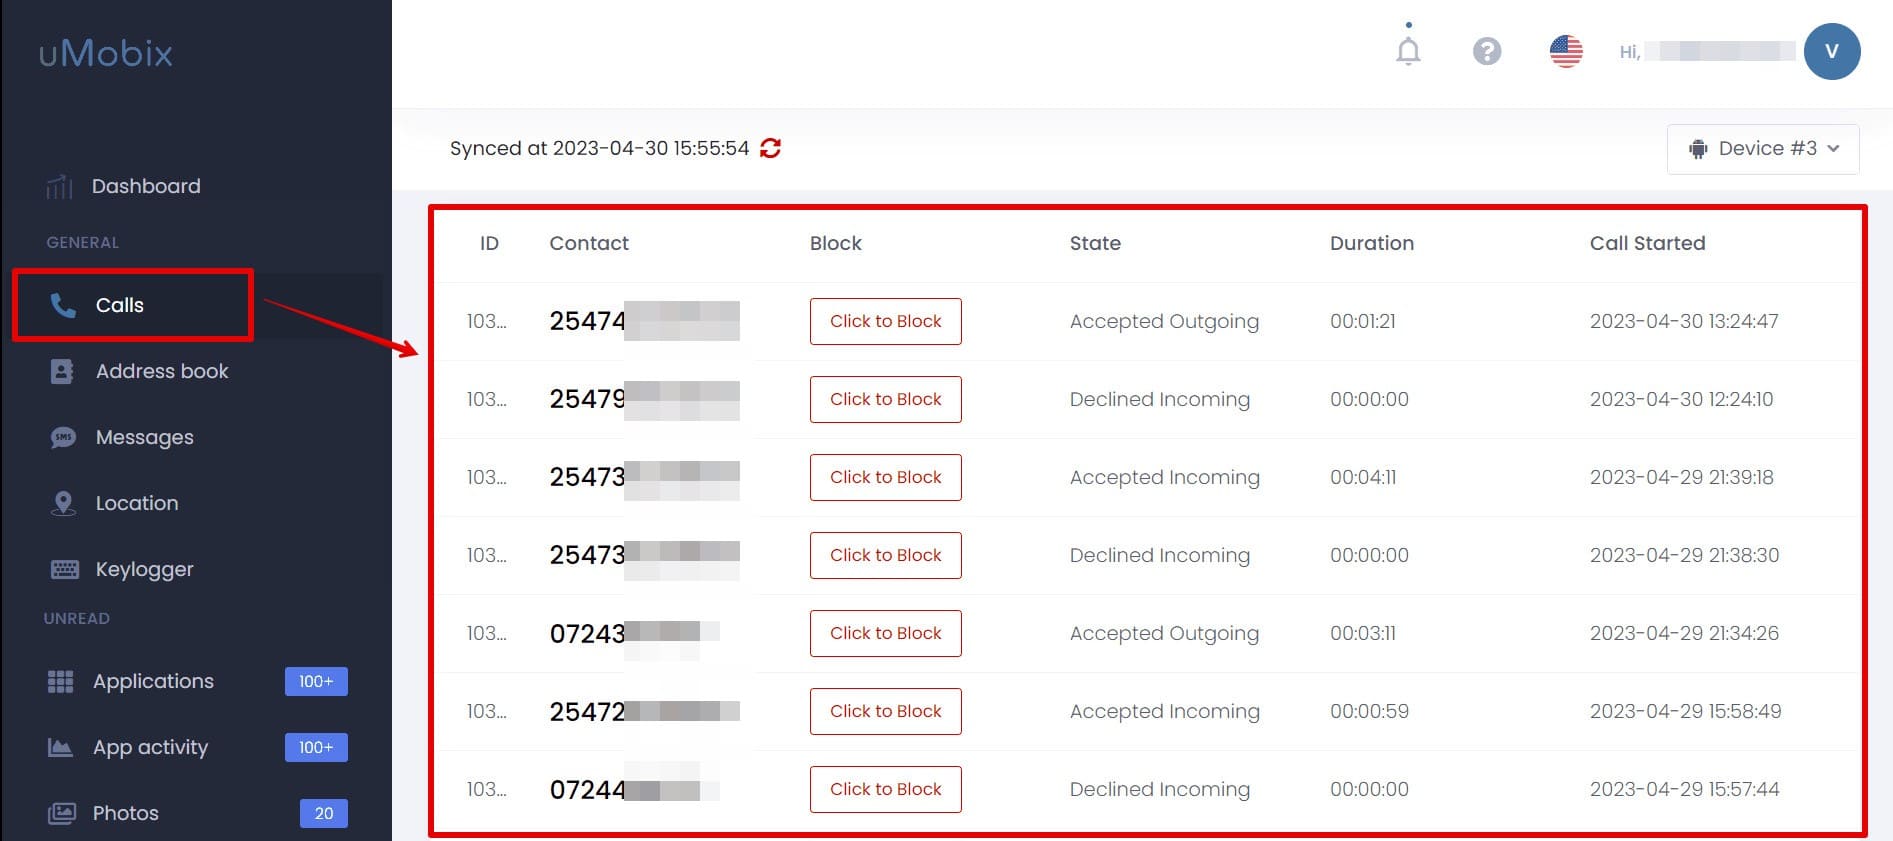 uMobix showing call logs on its dashboard